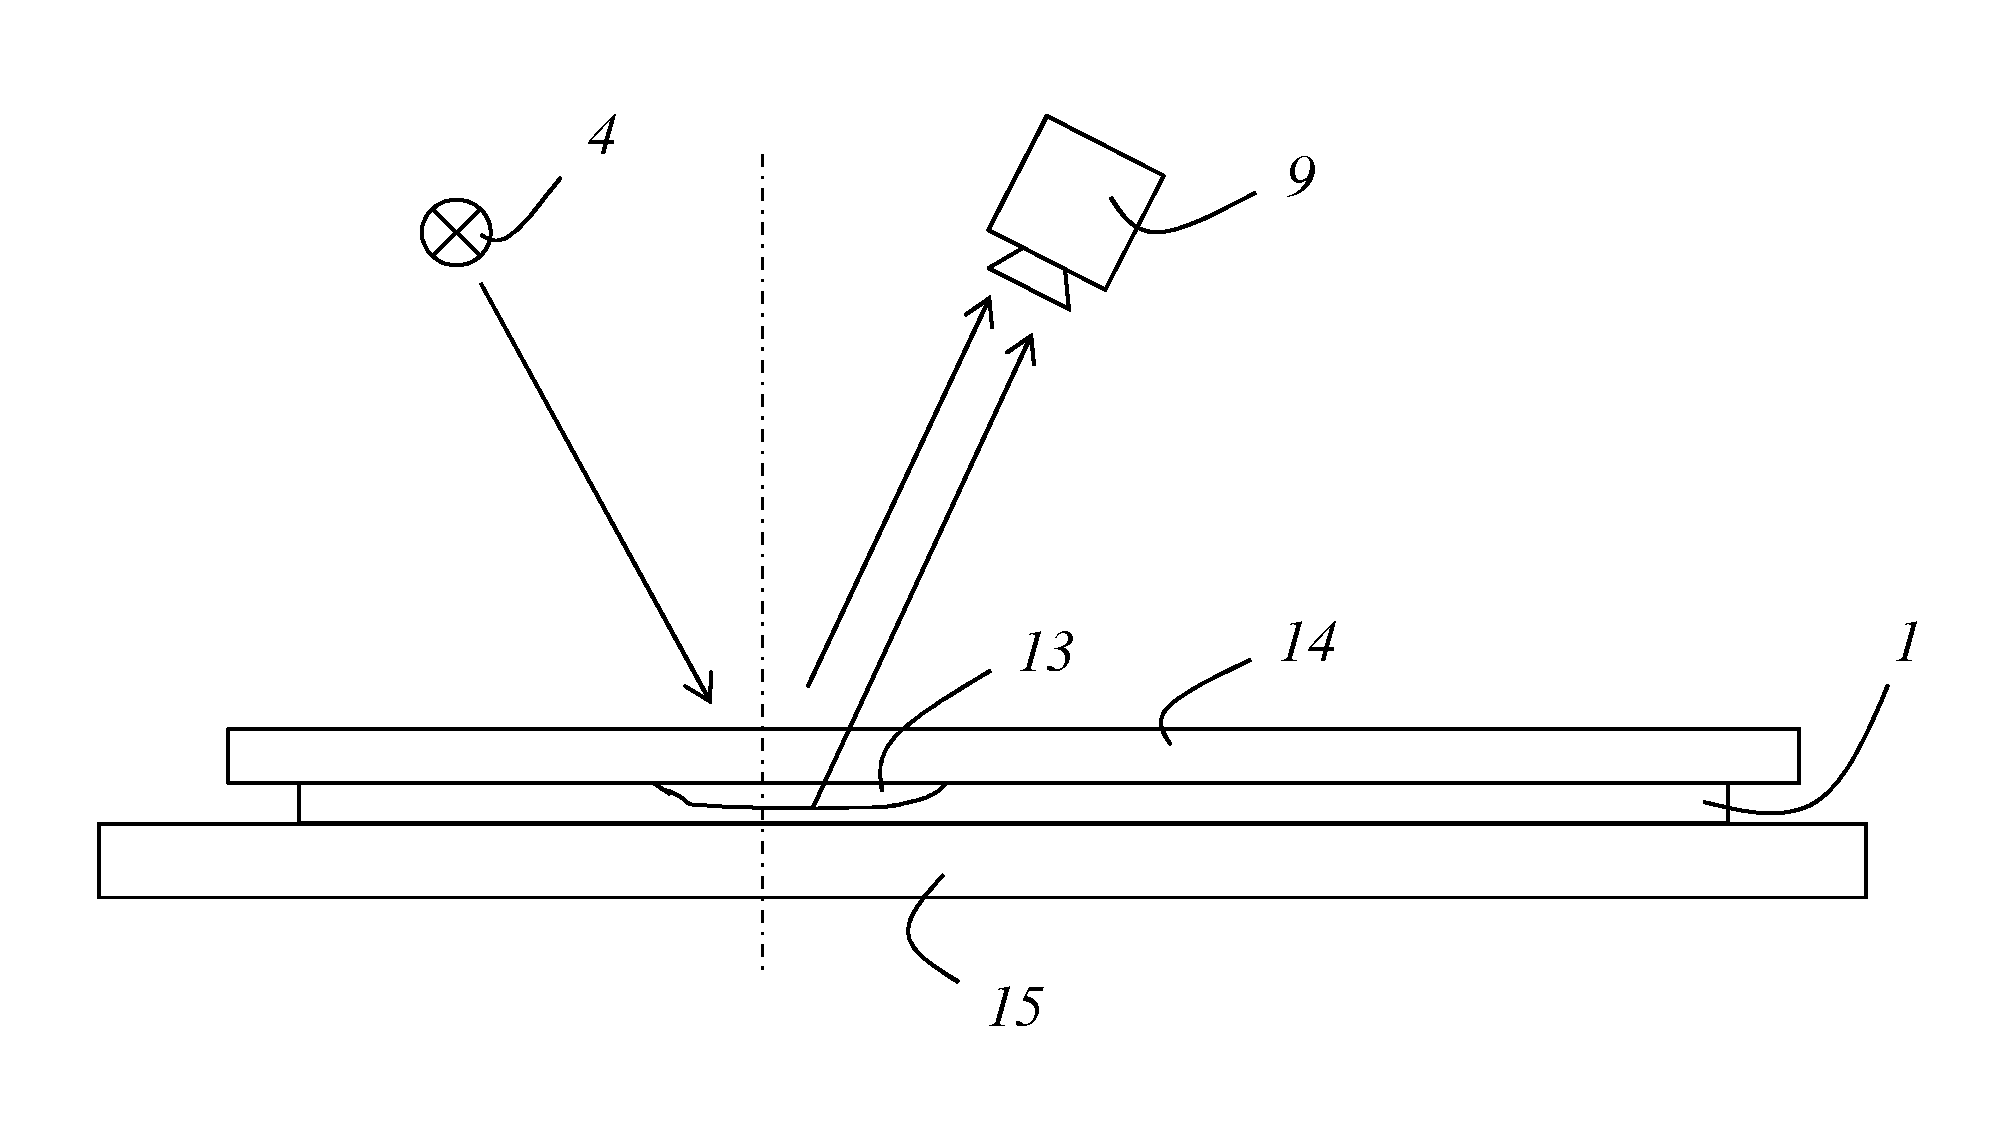 Method in the preparation of samples for microscopic examination, and apparatus for checking the coverslipping quality of samples